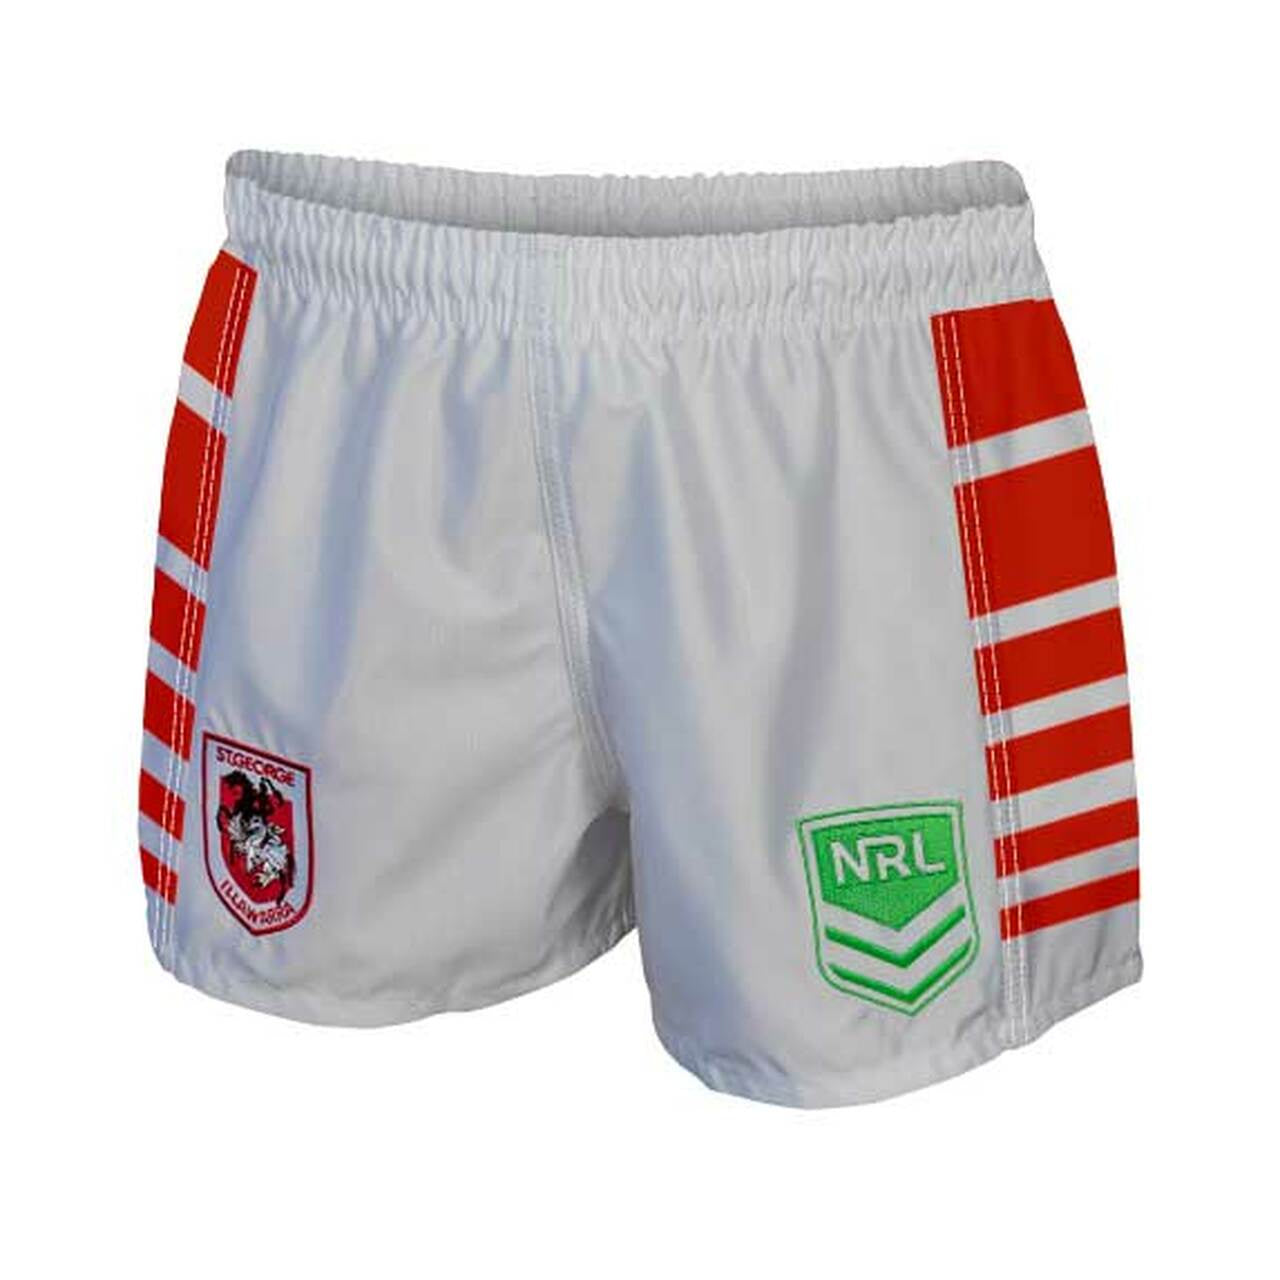 Dragons Supporter Shorts - The Rugby Shop Darwin